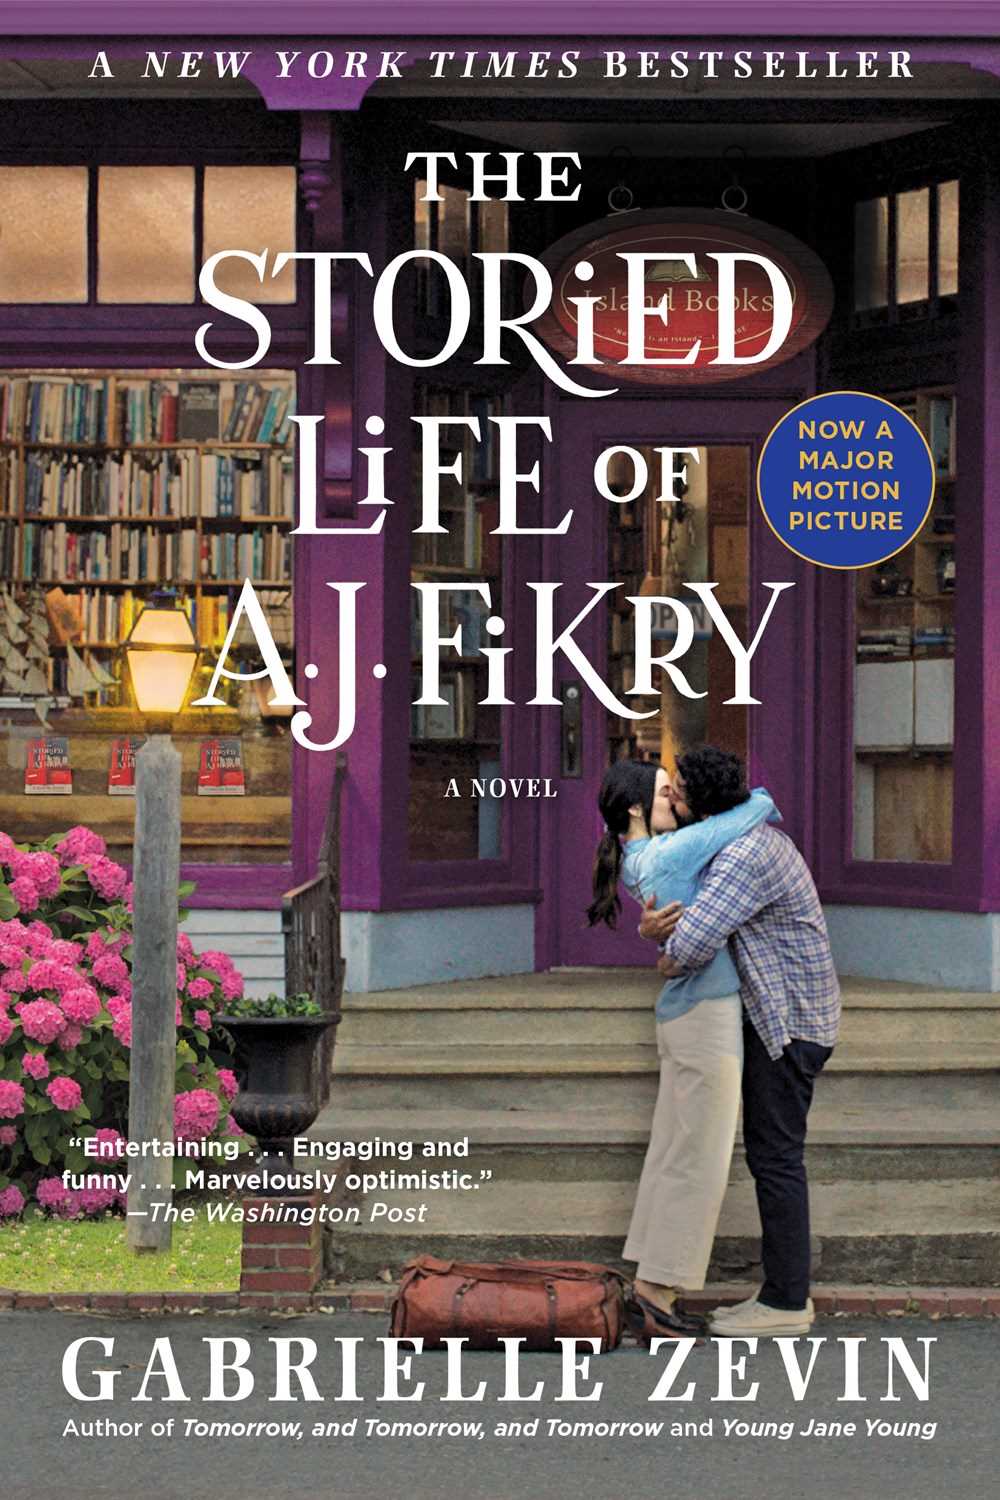 The Storied Life of A. J. Fikry (Film Tie-in)